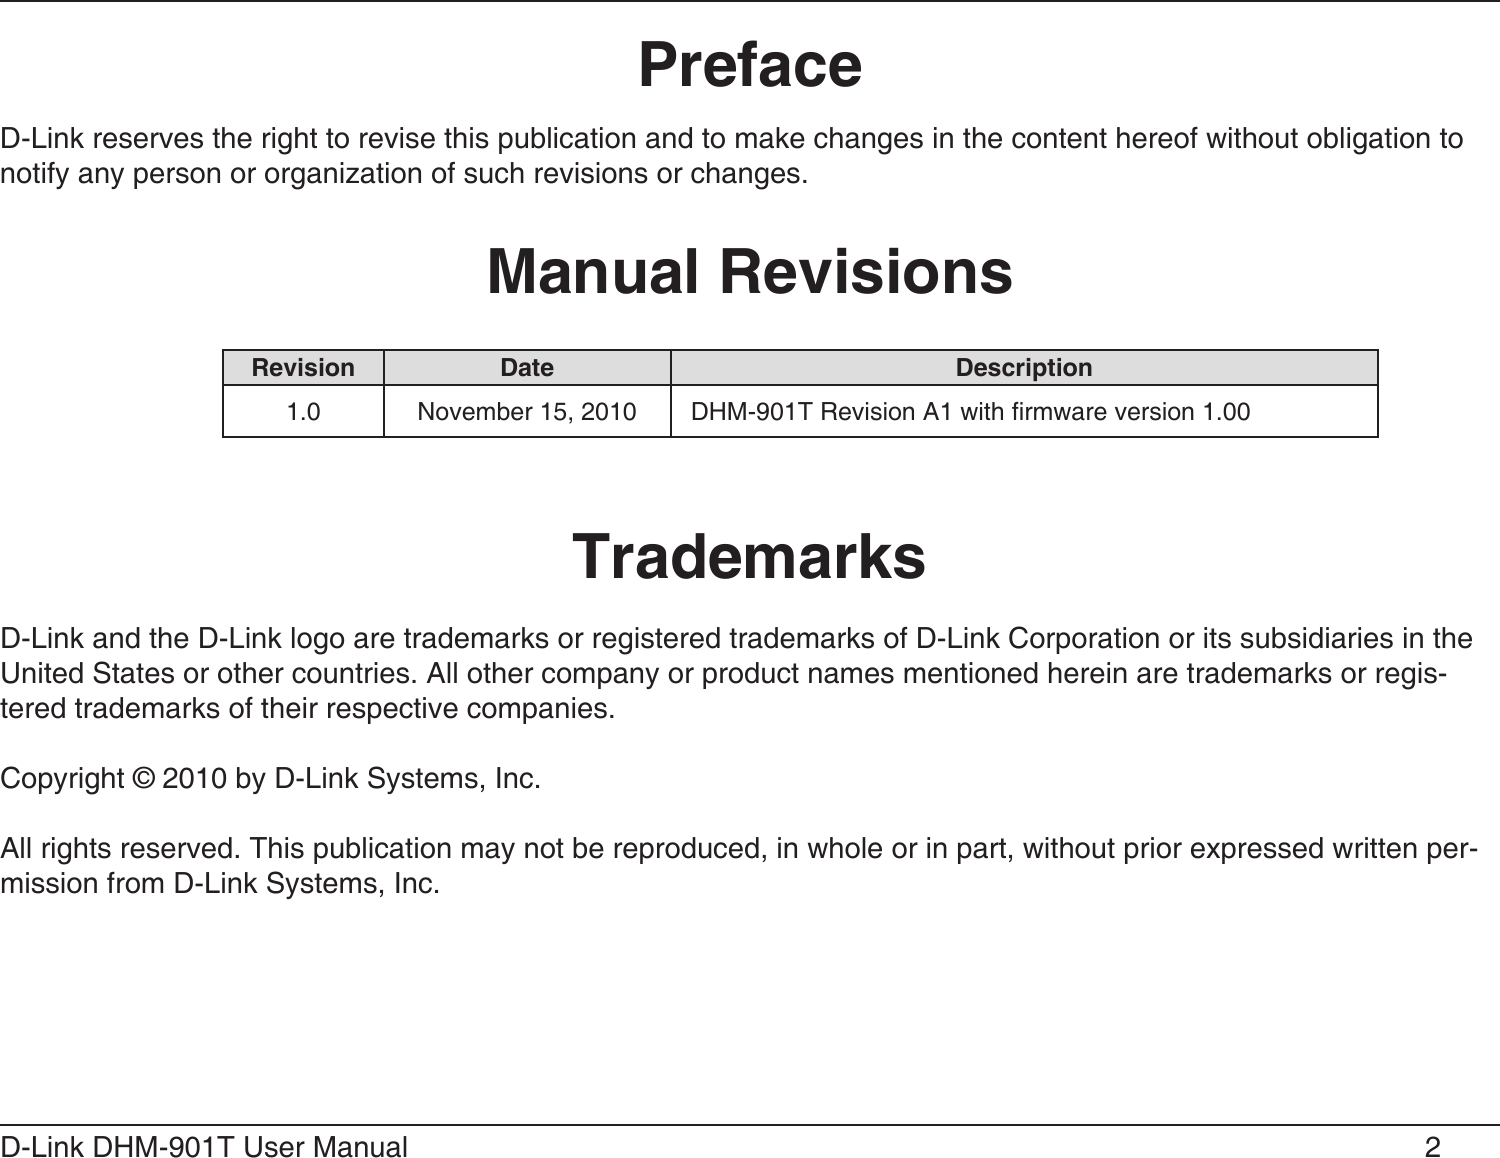 2D-Link DHM-901T User Manual D-Link reserves the right to revise this publication and to make changes in the content hereof without obligation to notify any person or organization of such revisions or changes.D-Link and the D-Link logo are trademarks or registered trademarks of D-Link Corporation or its subsidiaries in the United States or other countries. All other company or product names mentioned herein are trademarks or regis-tered trademarks of their respective companies.Copyright © 2010 by D-Link Systems, Inc.All rights reserved. This publication may not be reproduced, in whole or in part, without prior expressed written per-mission from D-Link Systems, Inc.  1.0 November 15, 2010 DHM-901T Revision A1 with rmware version 1.00